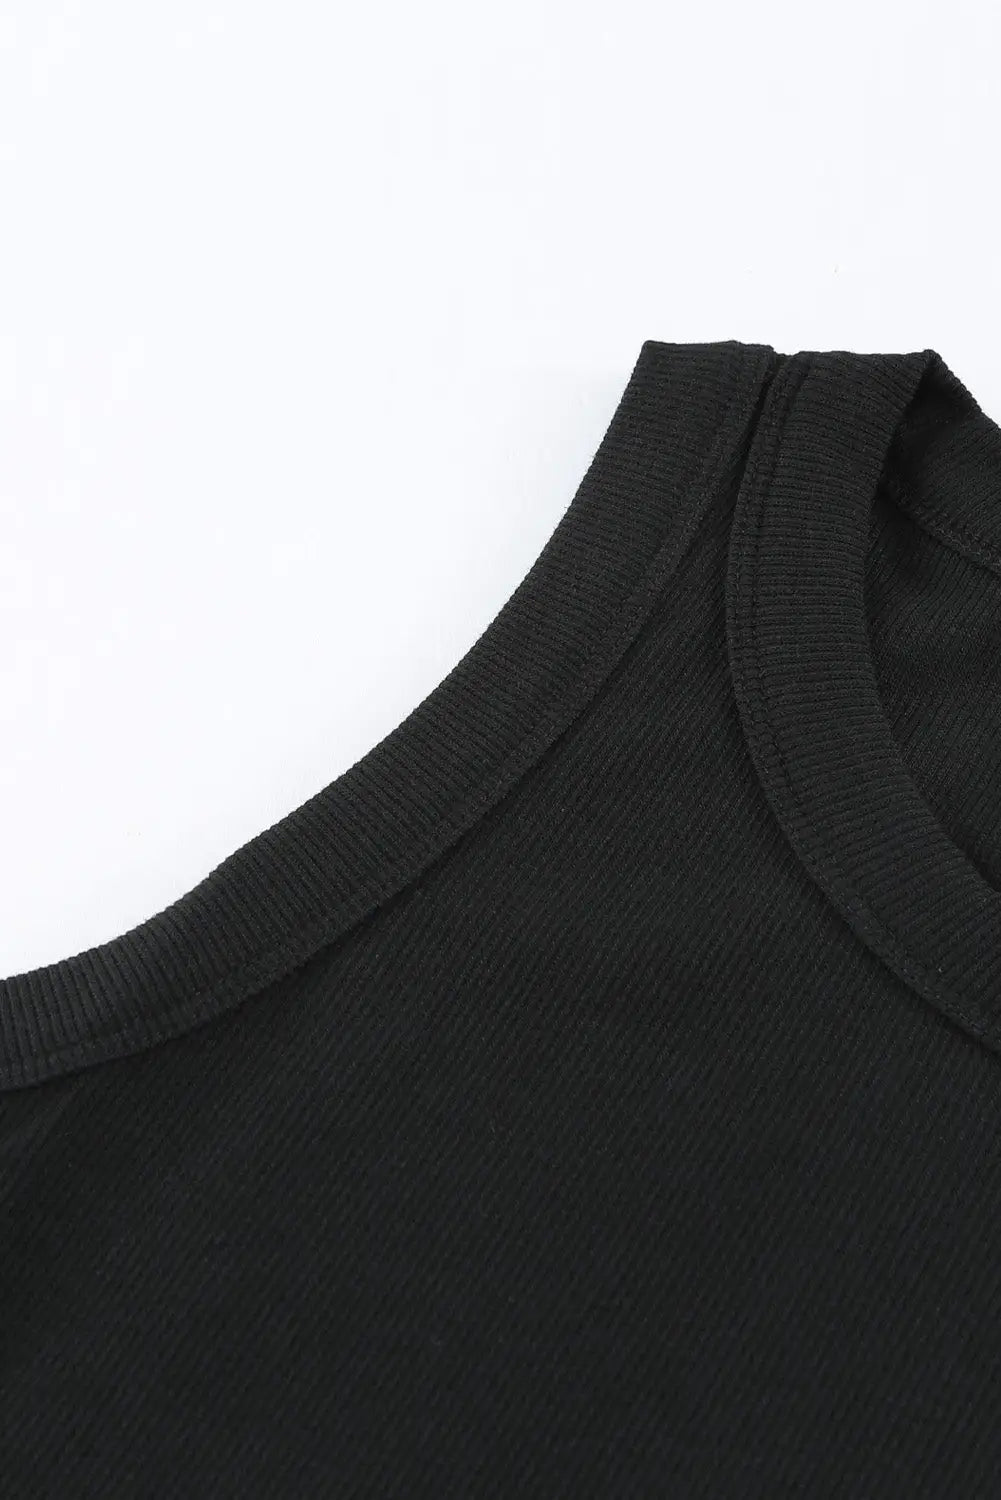 Solid black round neck ribbed tank top - tops